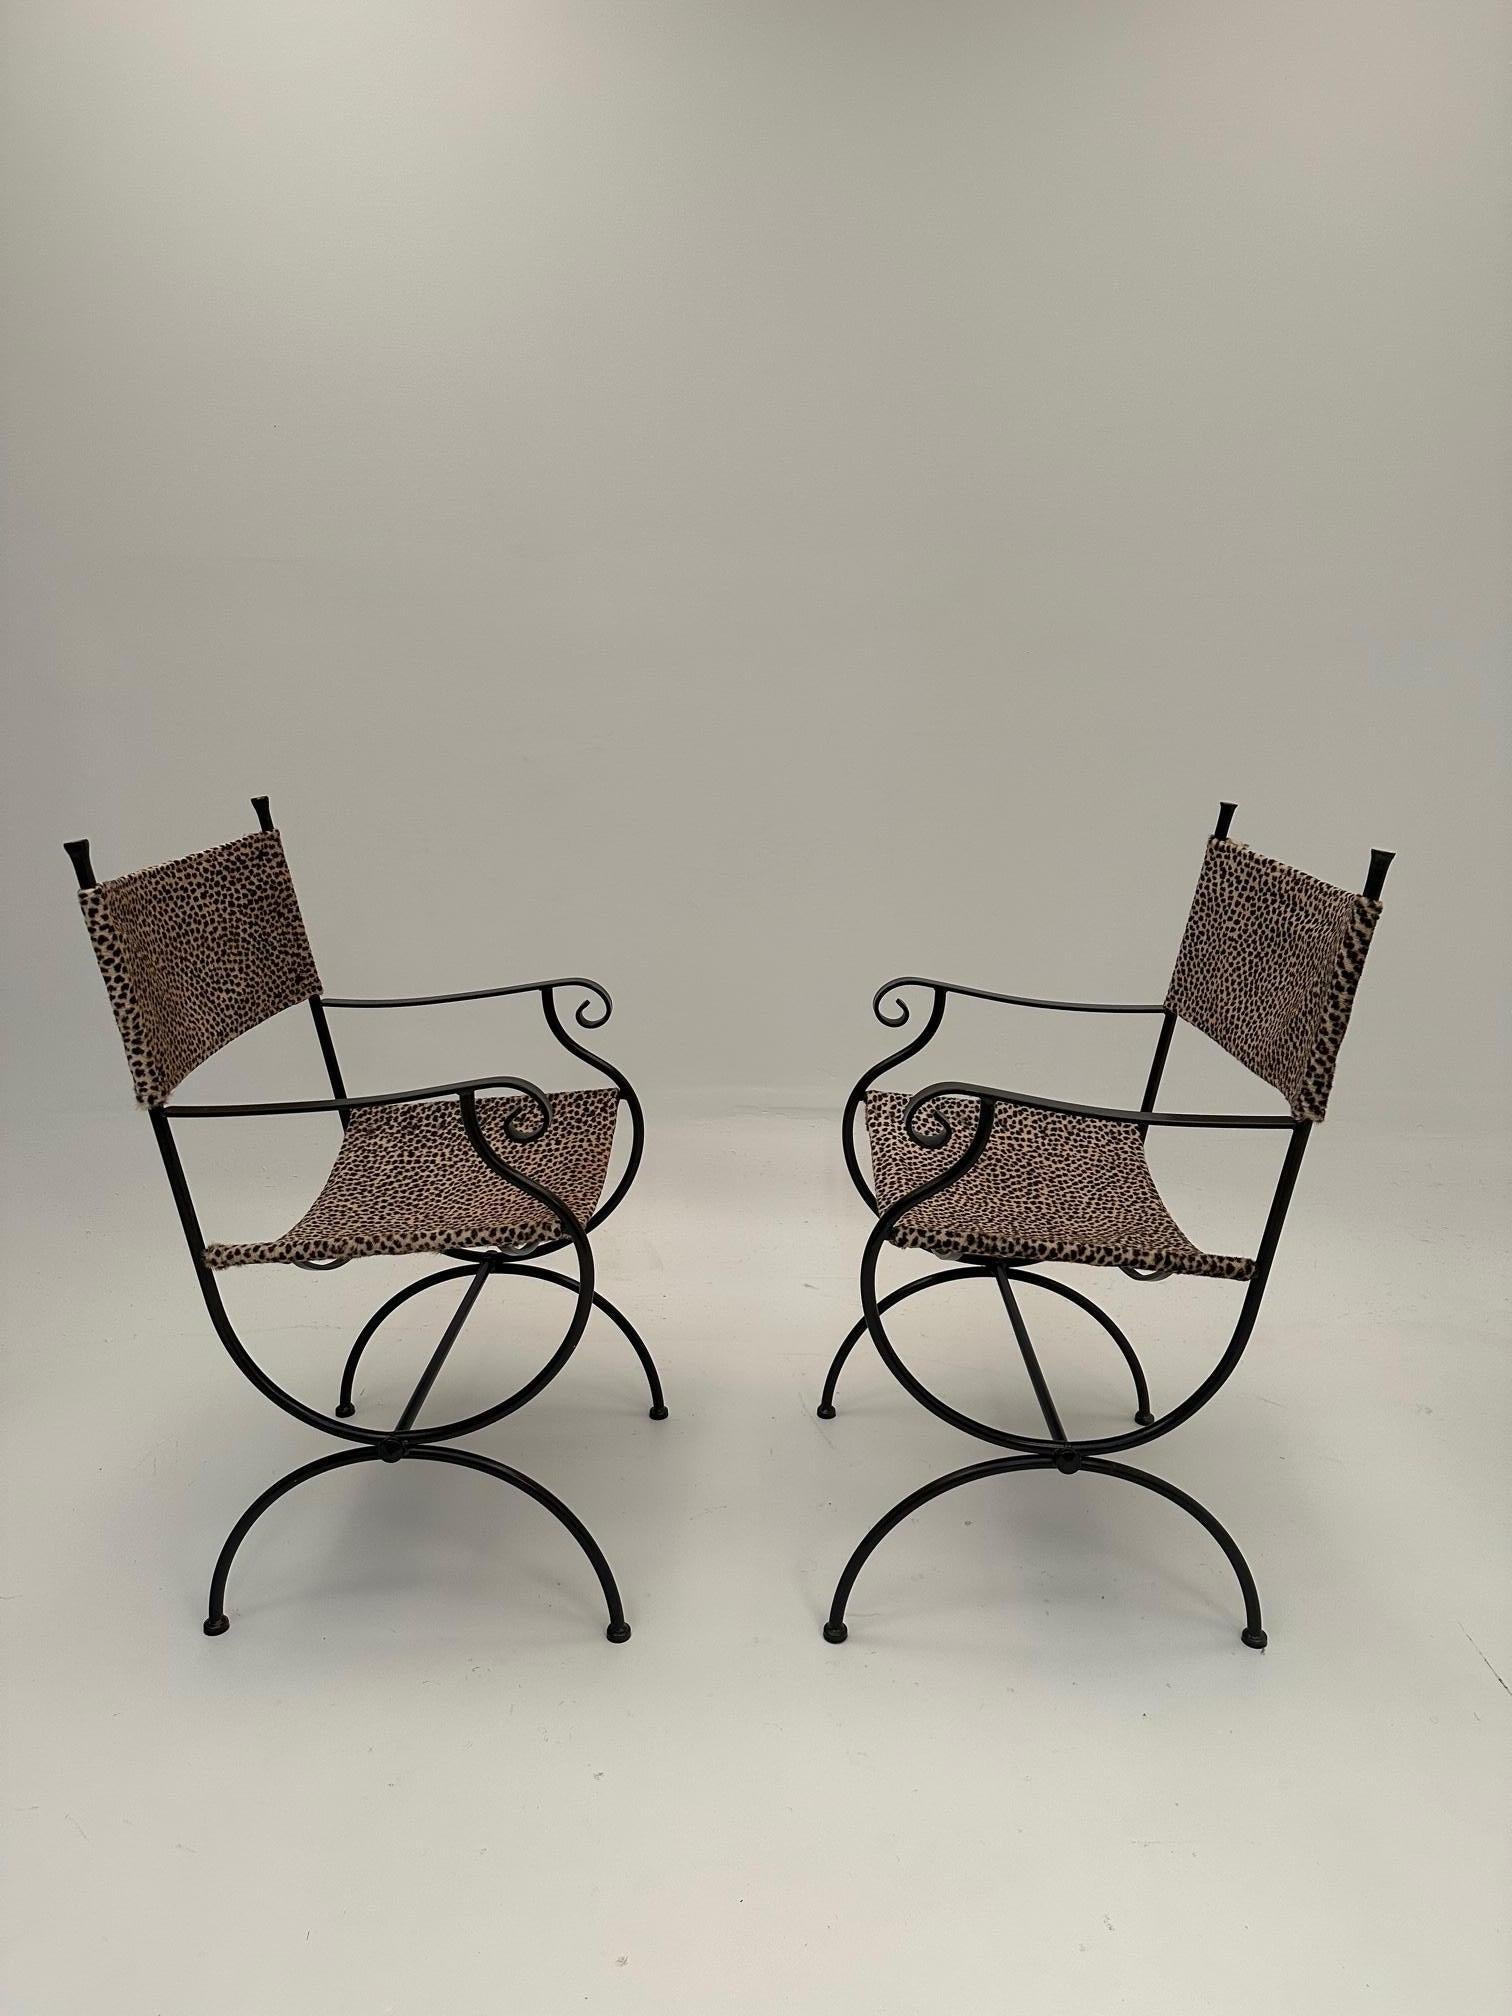 Chic Pair of Hand Wrought Iron Armchairs with Cowhide Animal Print Upholstery 1